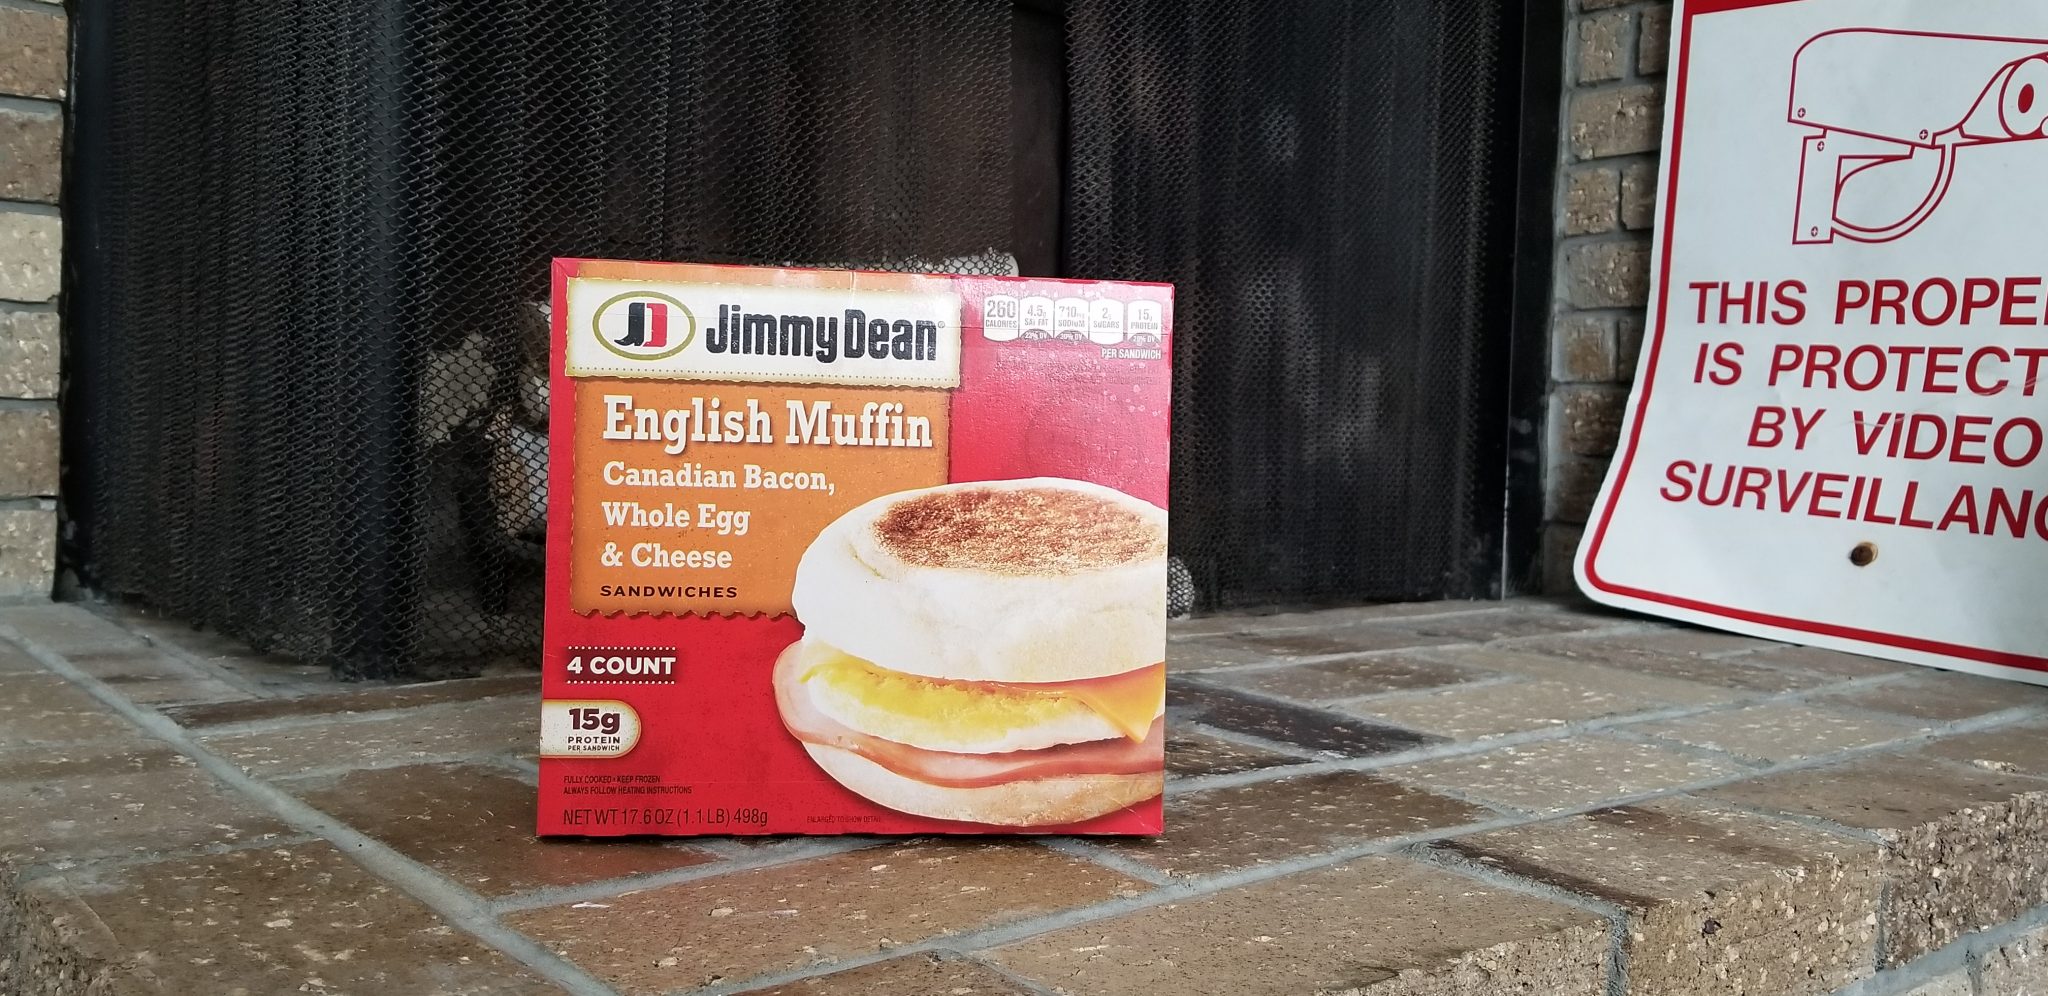 Picture of a box of Jimmy Dean's English Muffin Whole Egg and Cheese